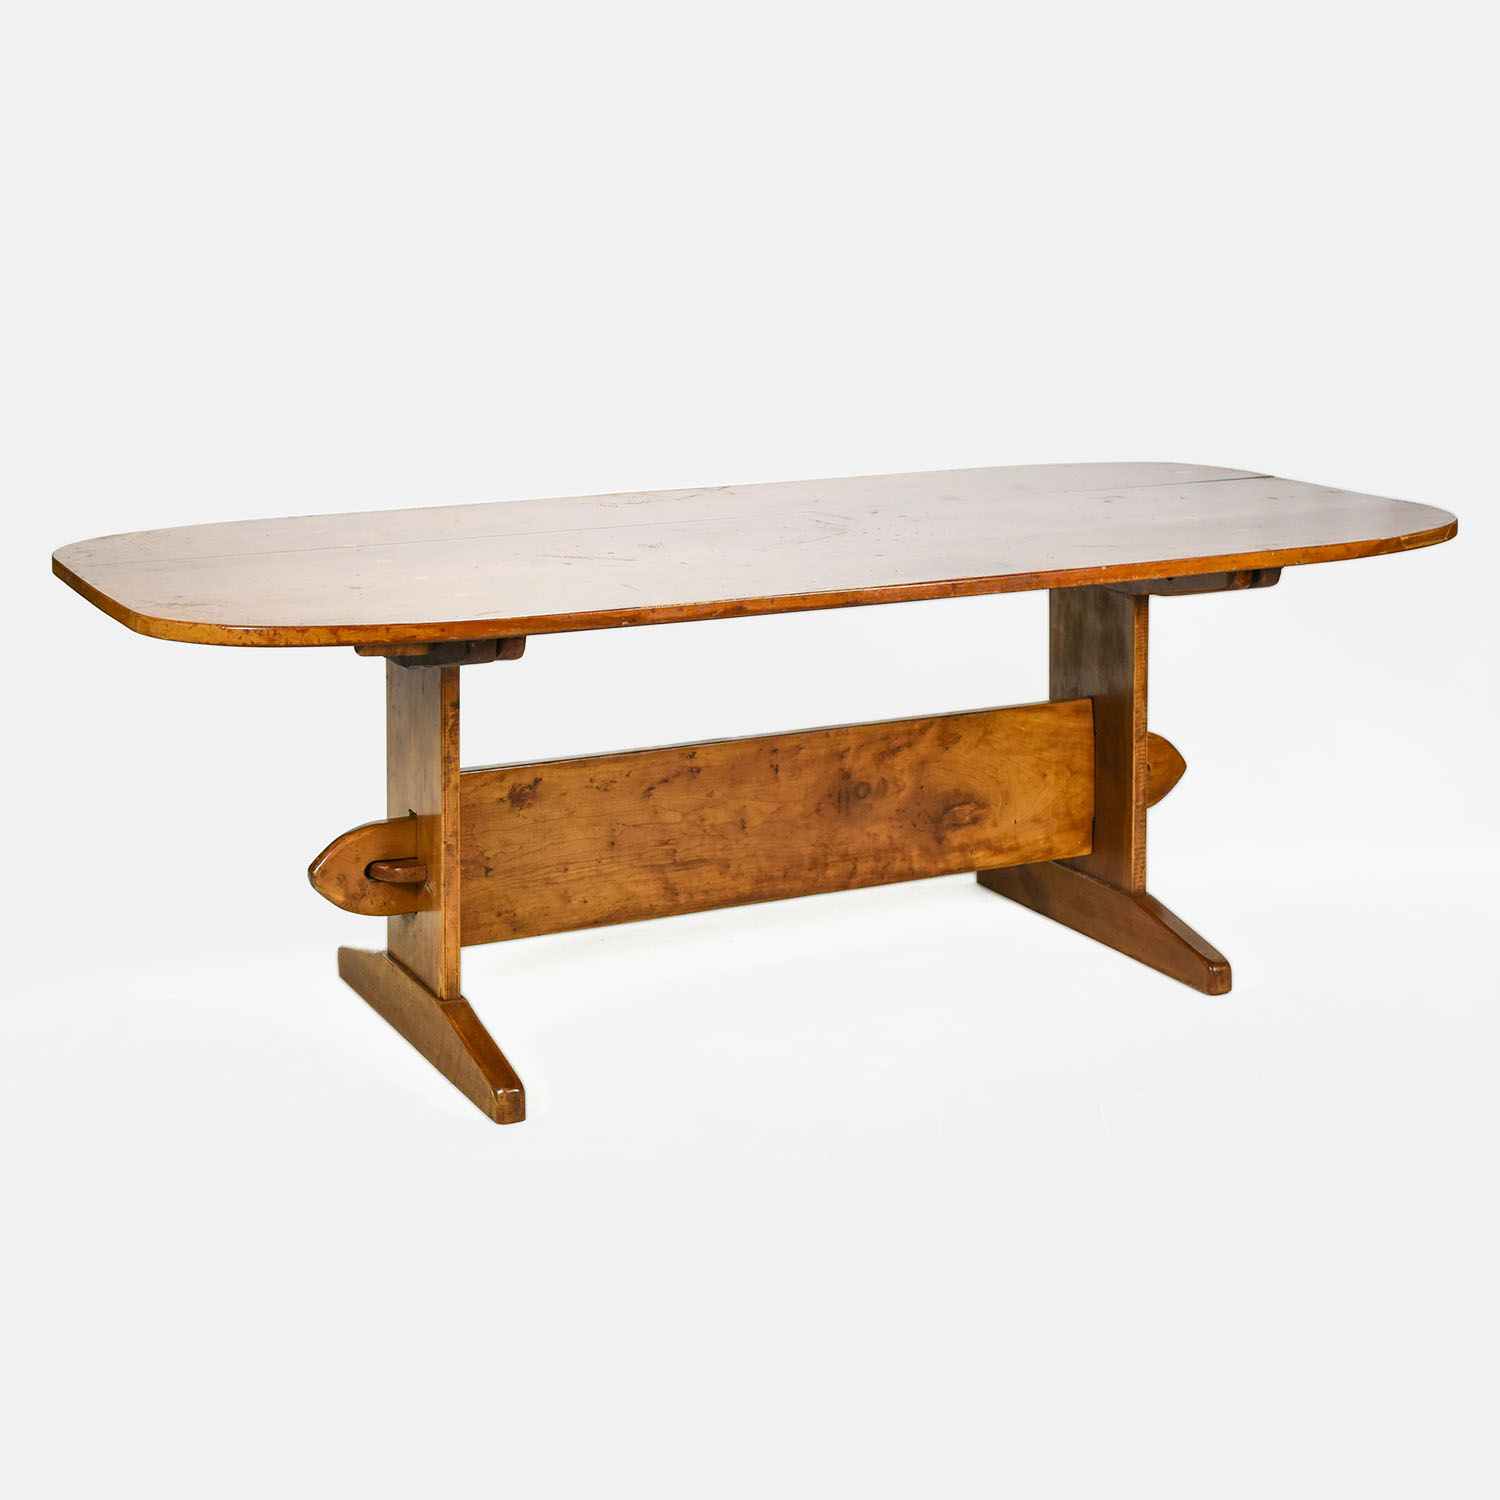 French Stained Pine Wood Dining Farm Trestle Table